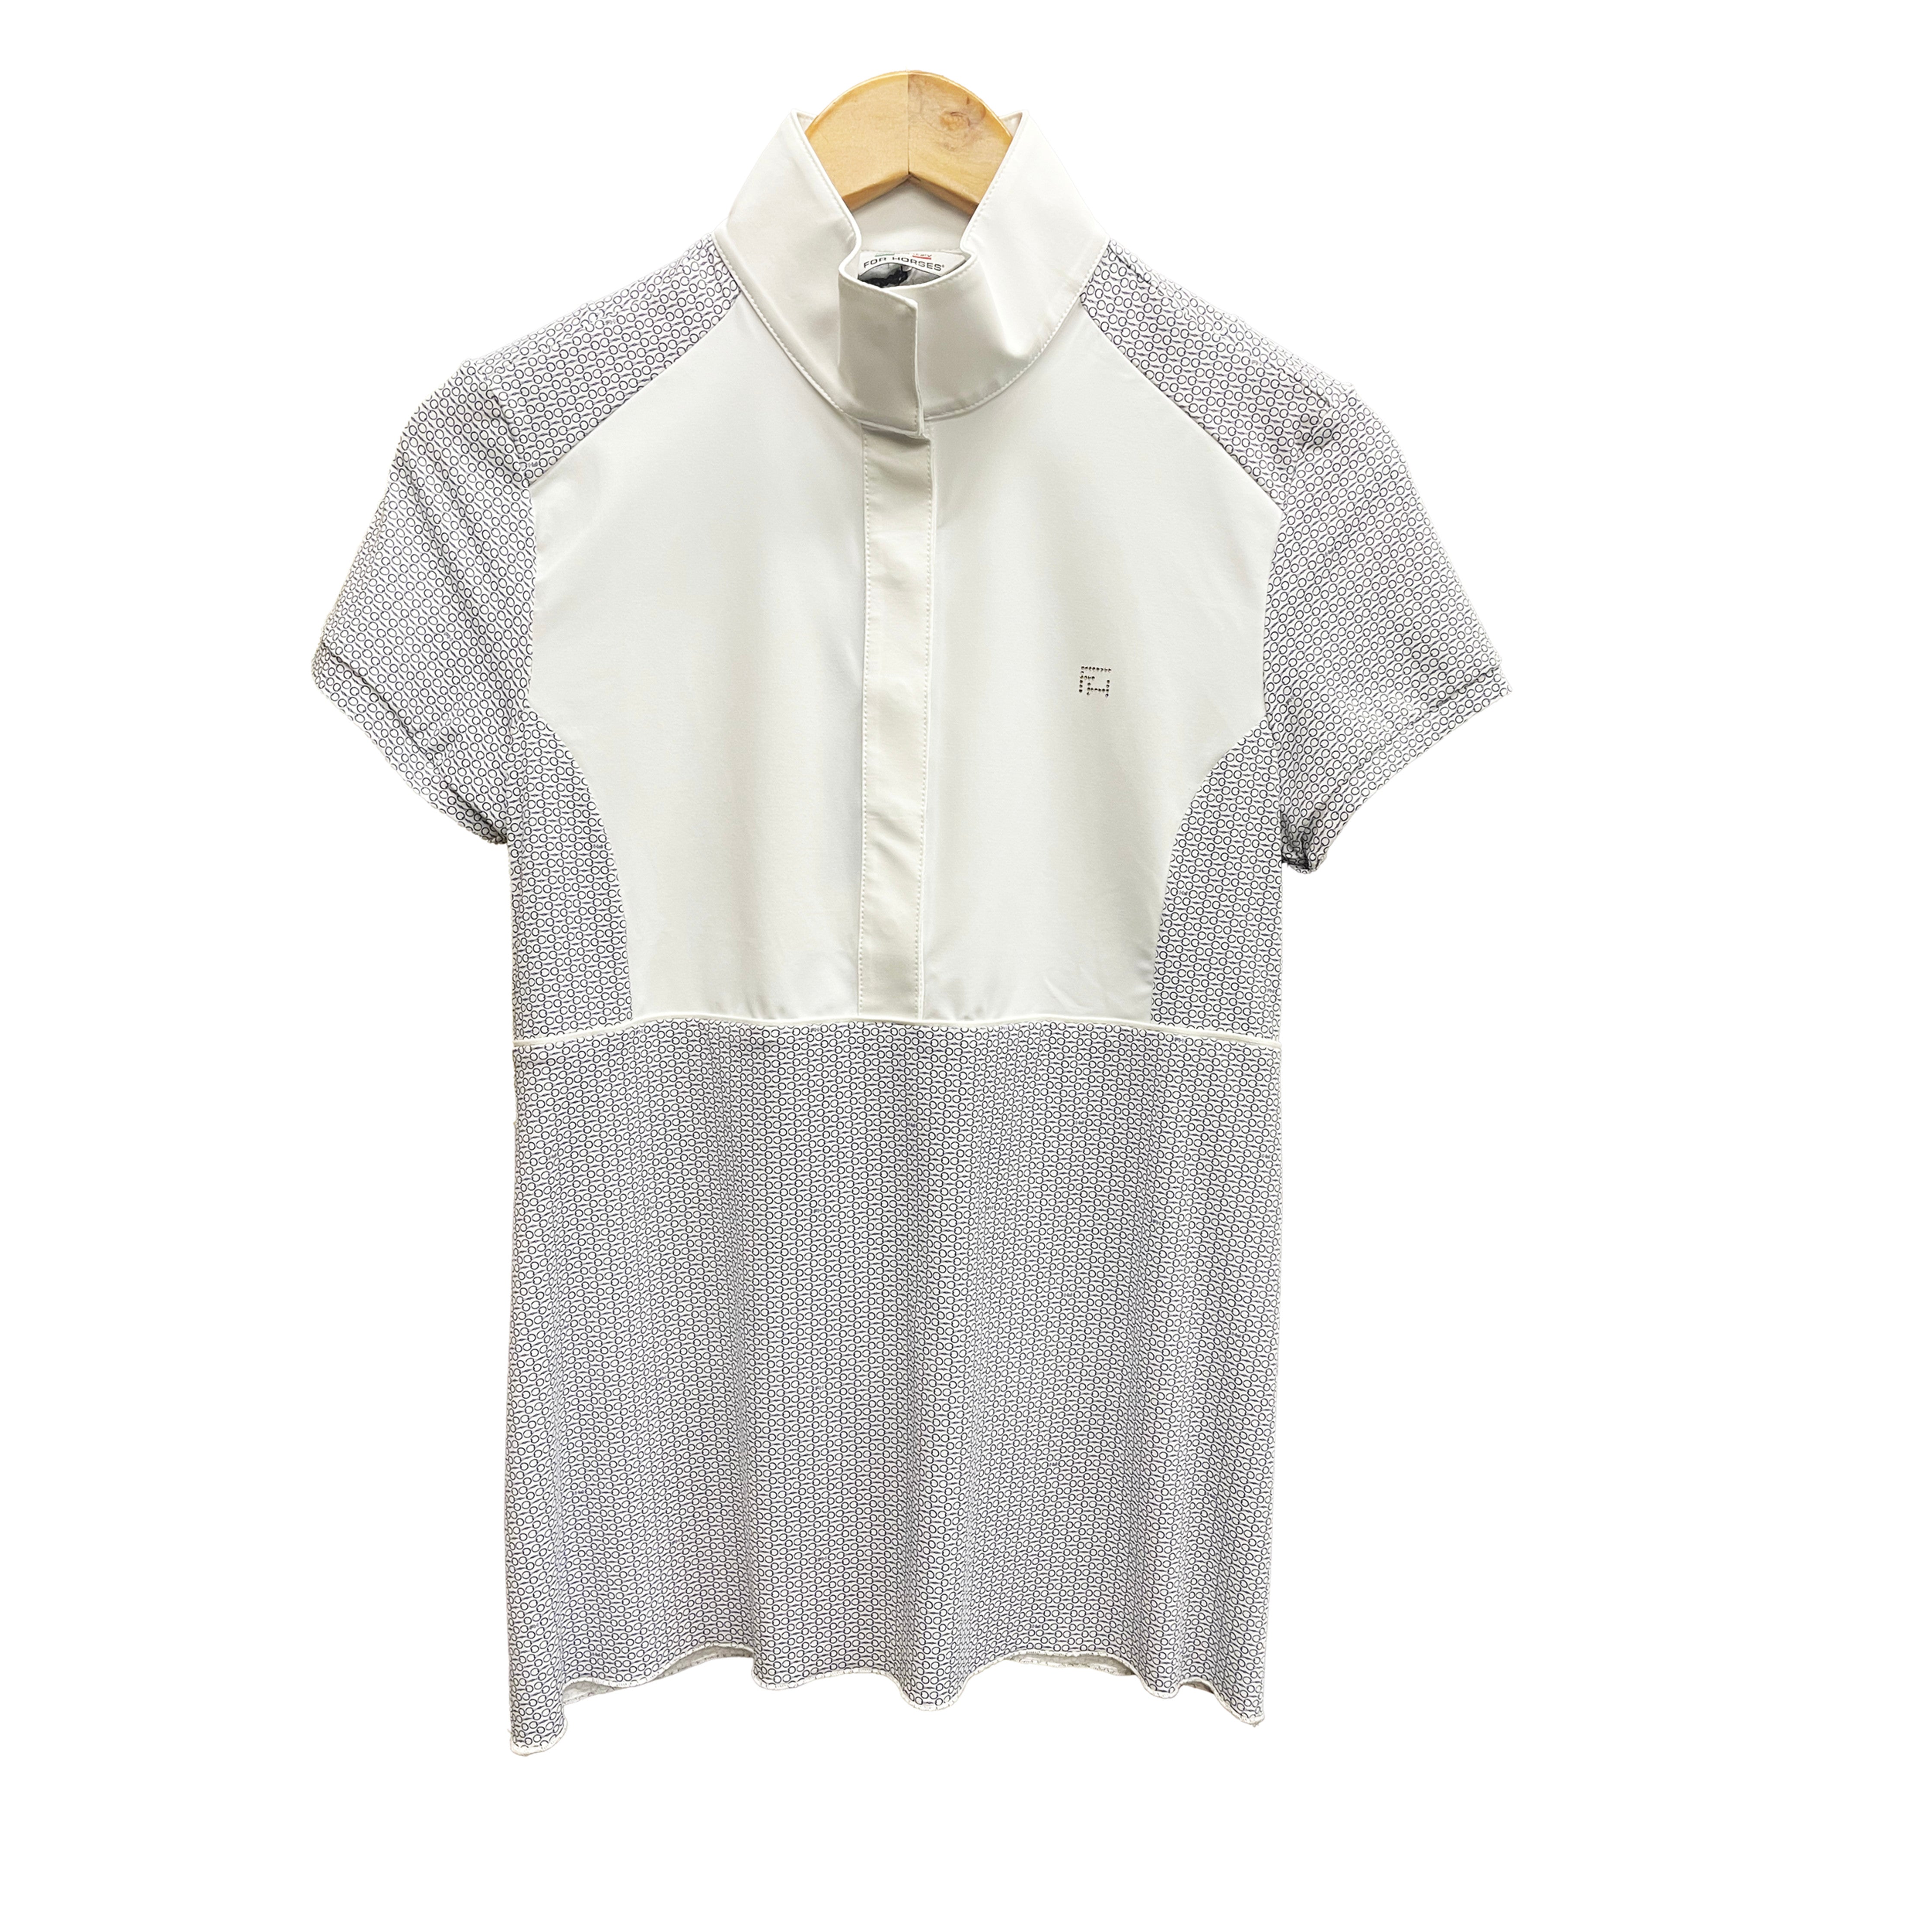 For Horses Emie Piped Shirt s/s ladies